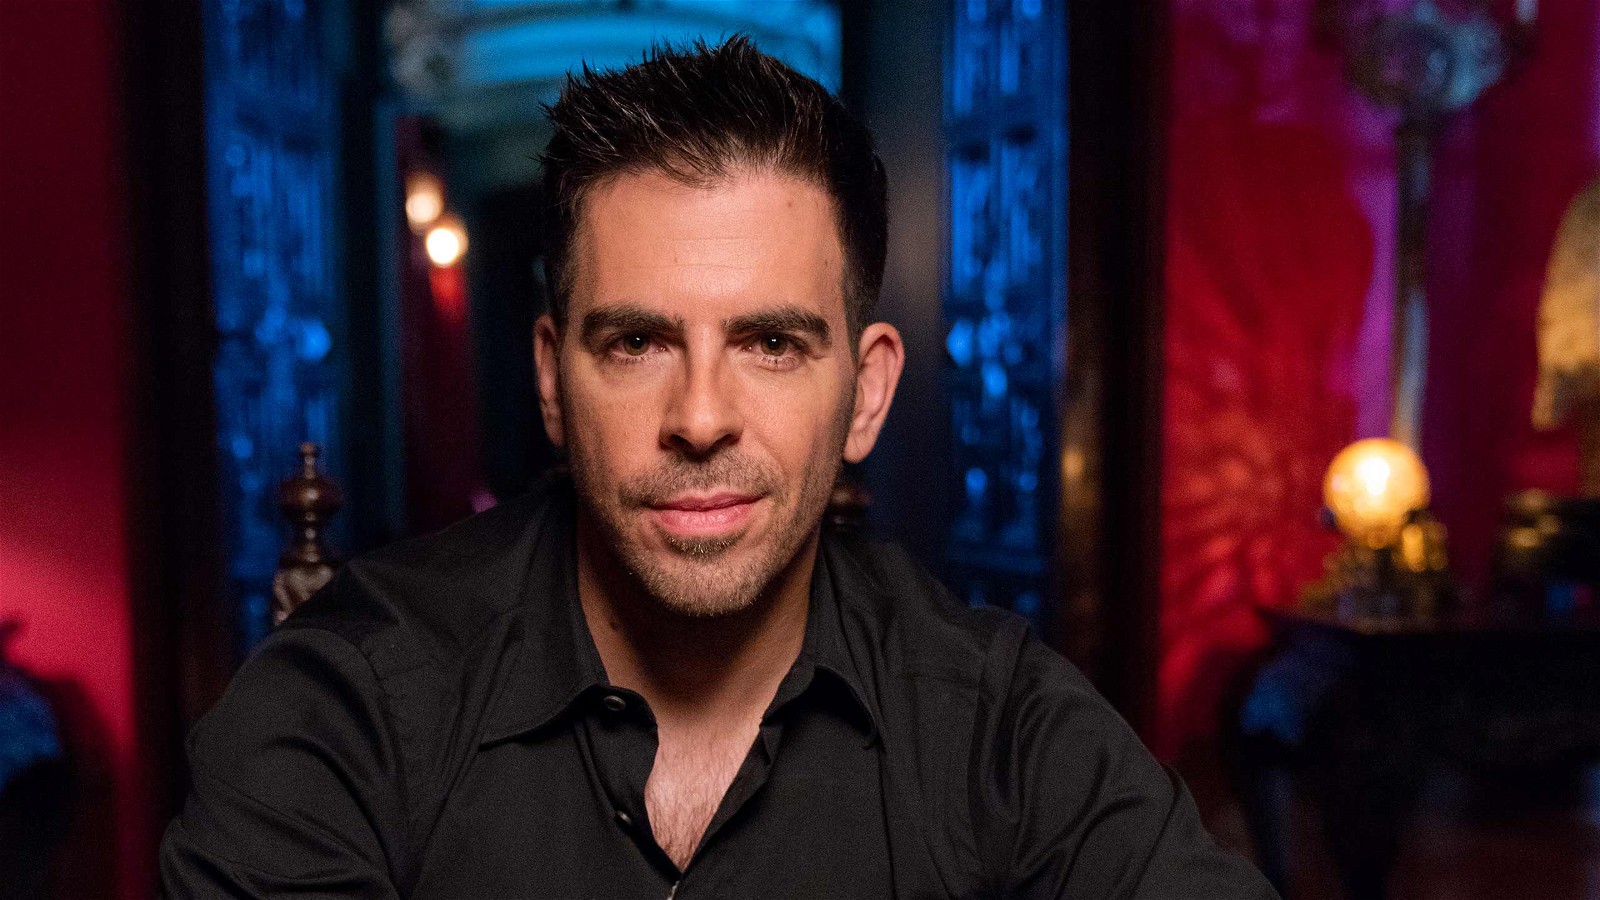 Director, screenwriter, and actor Eli Roth